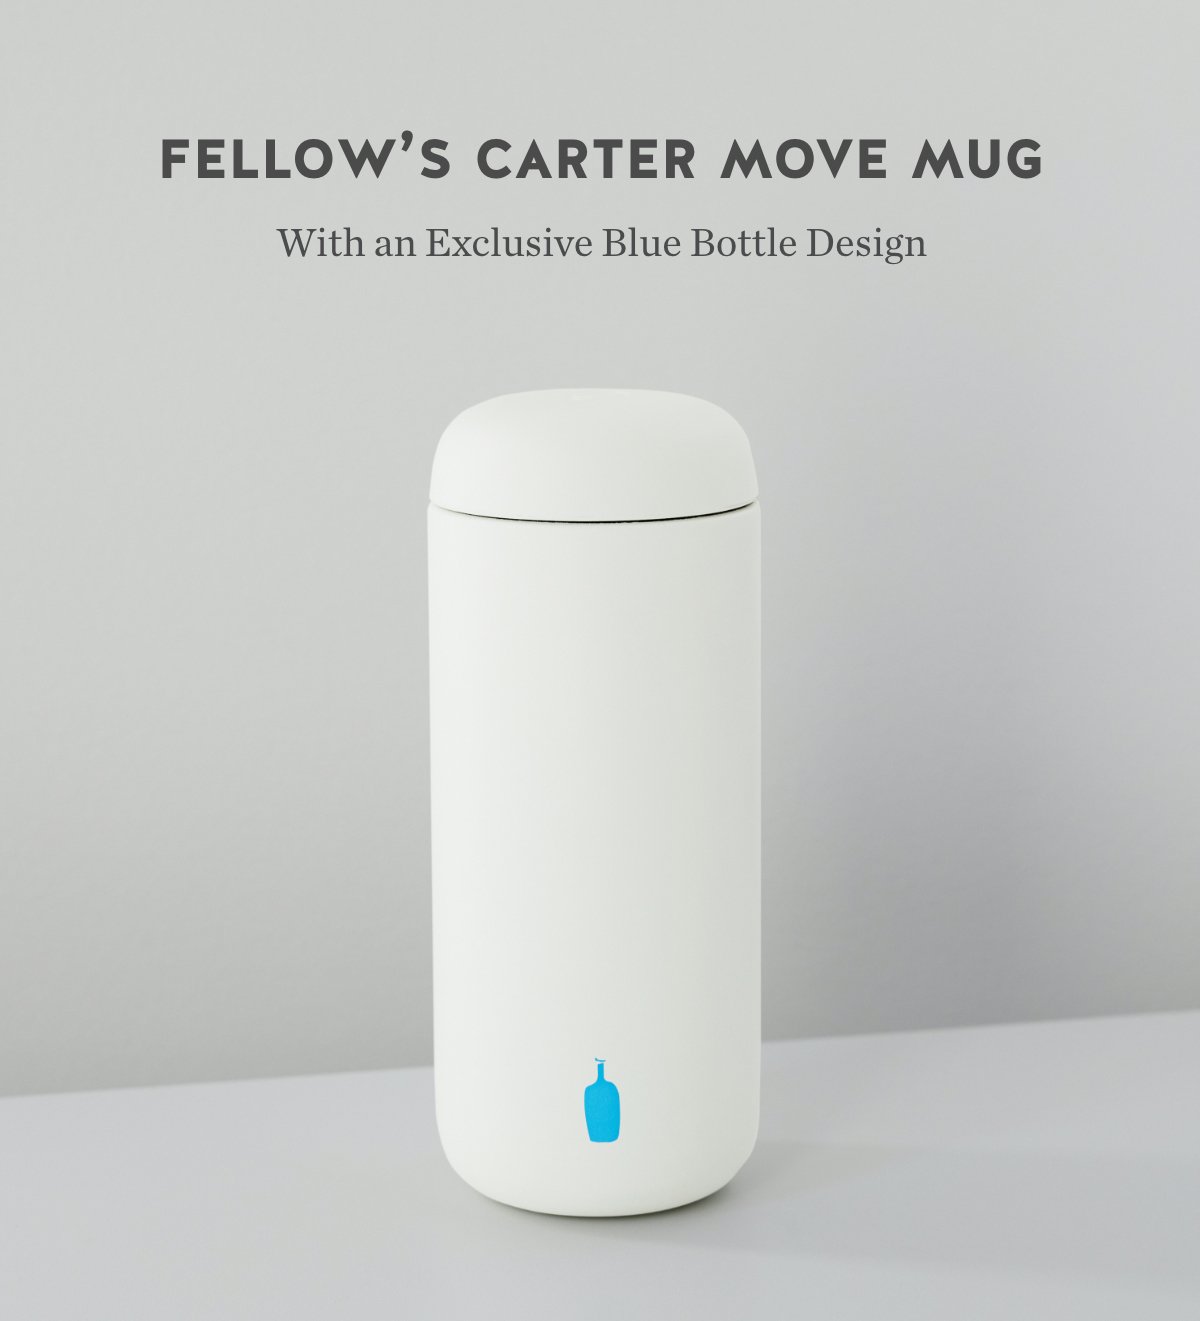 Blue Bottle Coffee Selected Bottles Limited Time Promotion 25% off